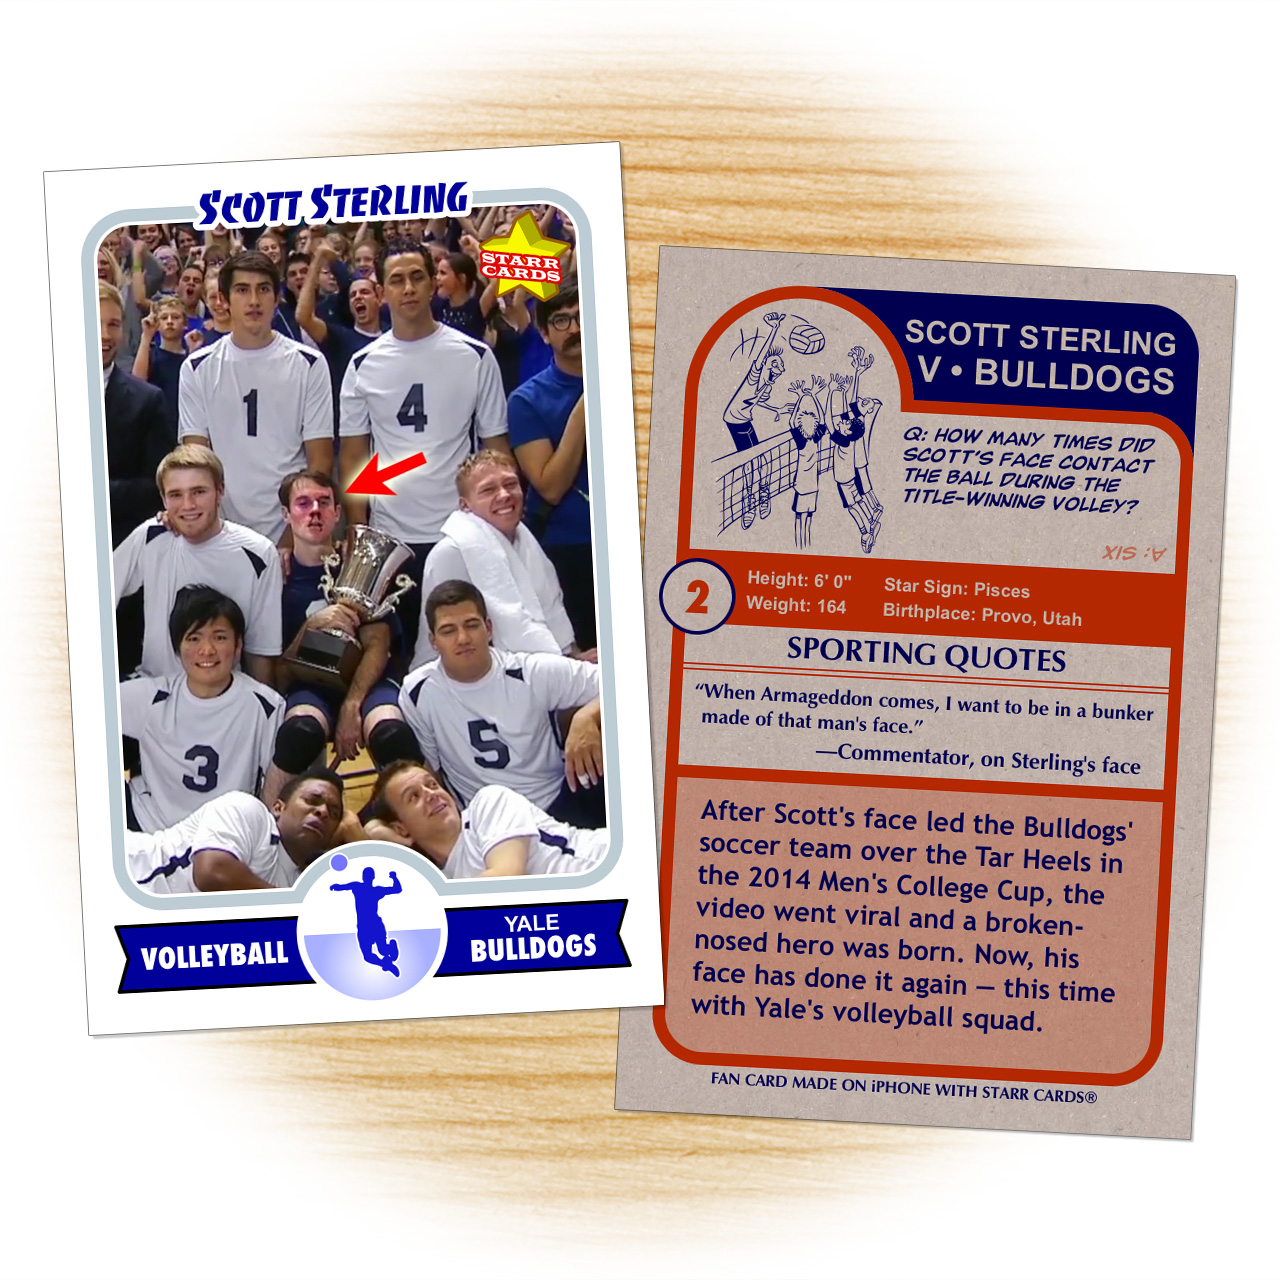 Fan card of Scott Sterling for Yale Bulldogs' volleyball team